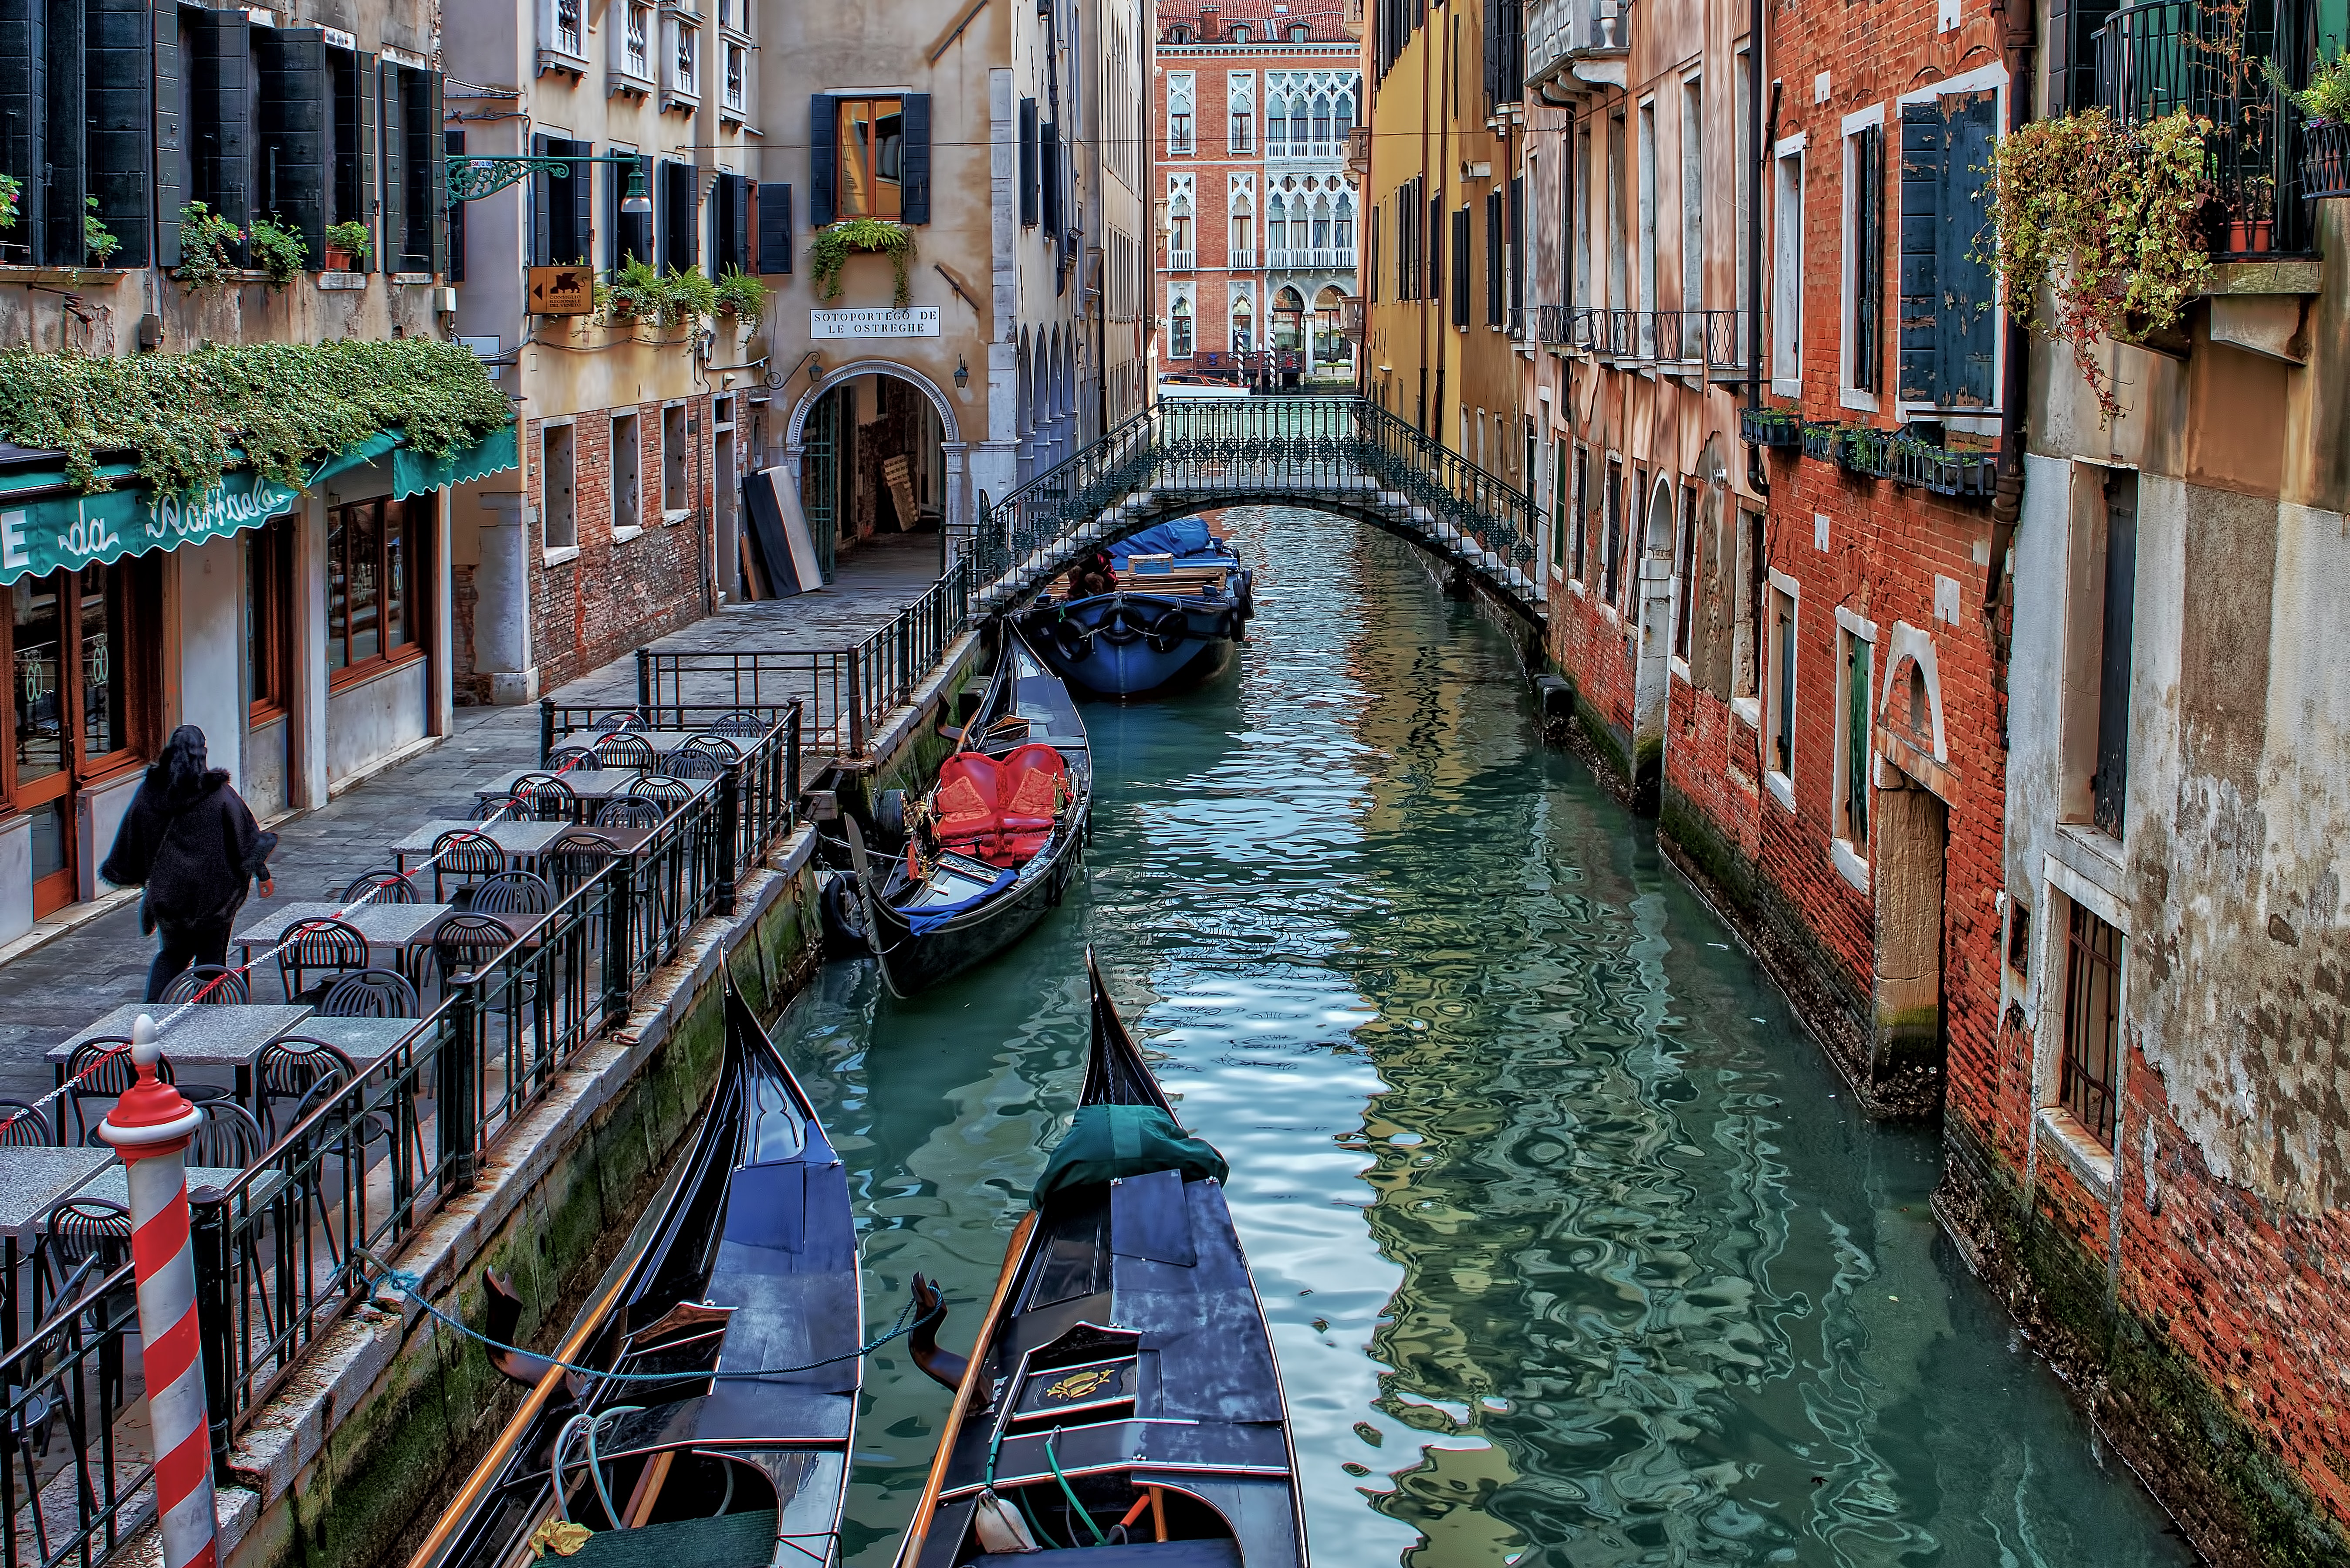 Cover Image for Eat Your Way Through Venice: Top 14 Foods You Simply Cannot Miss And Where To Eat Them!